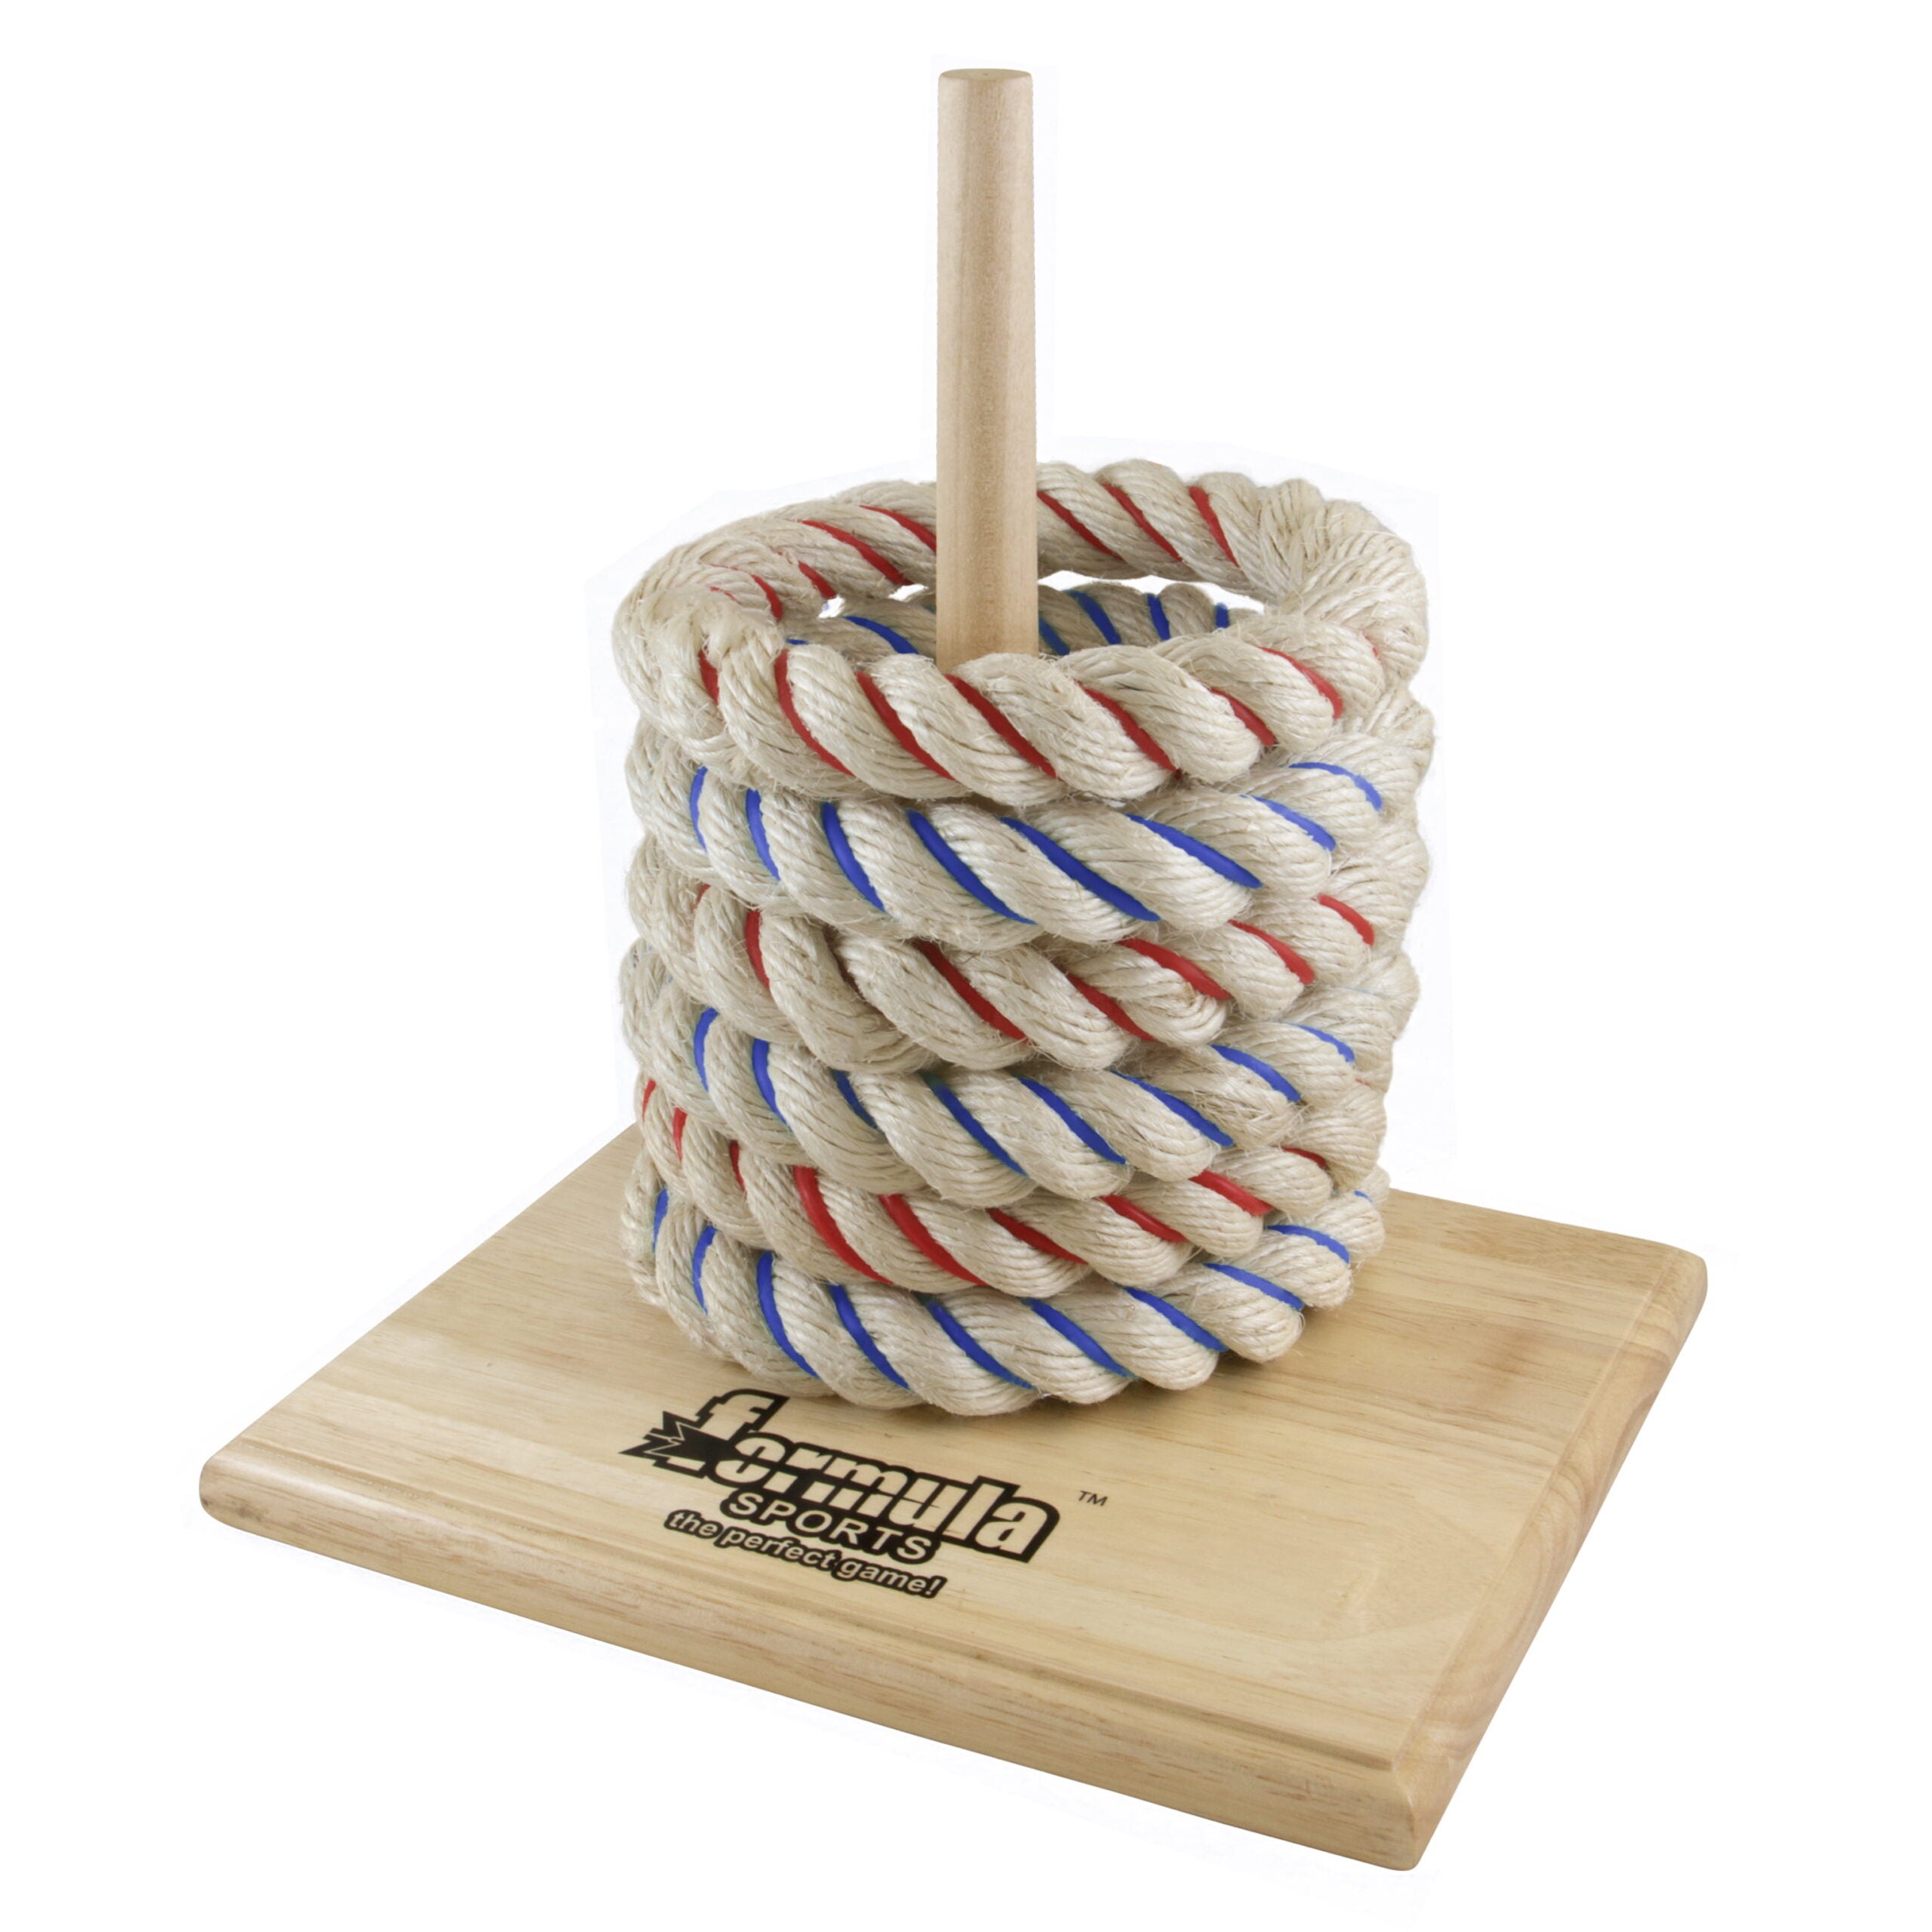 Formula Rope Quoits Set Quality Out Door Family Game includes Wooden Base & Peg